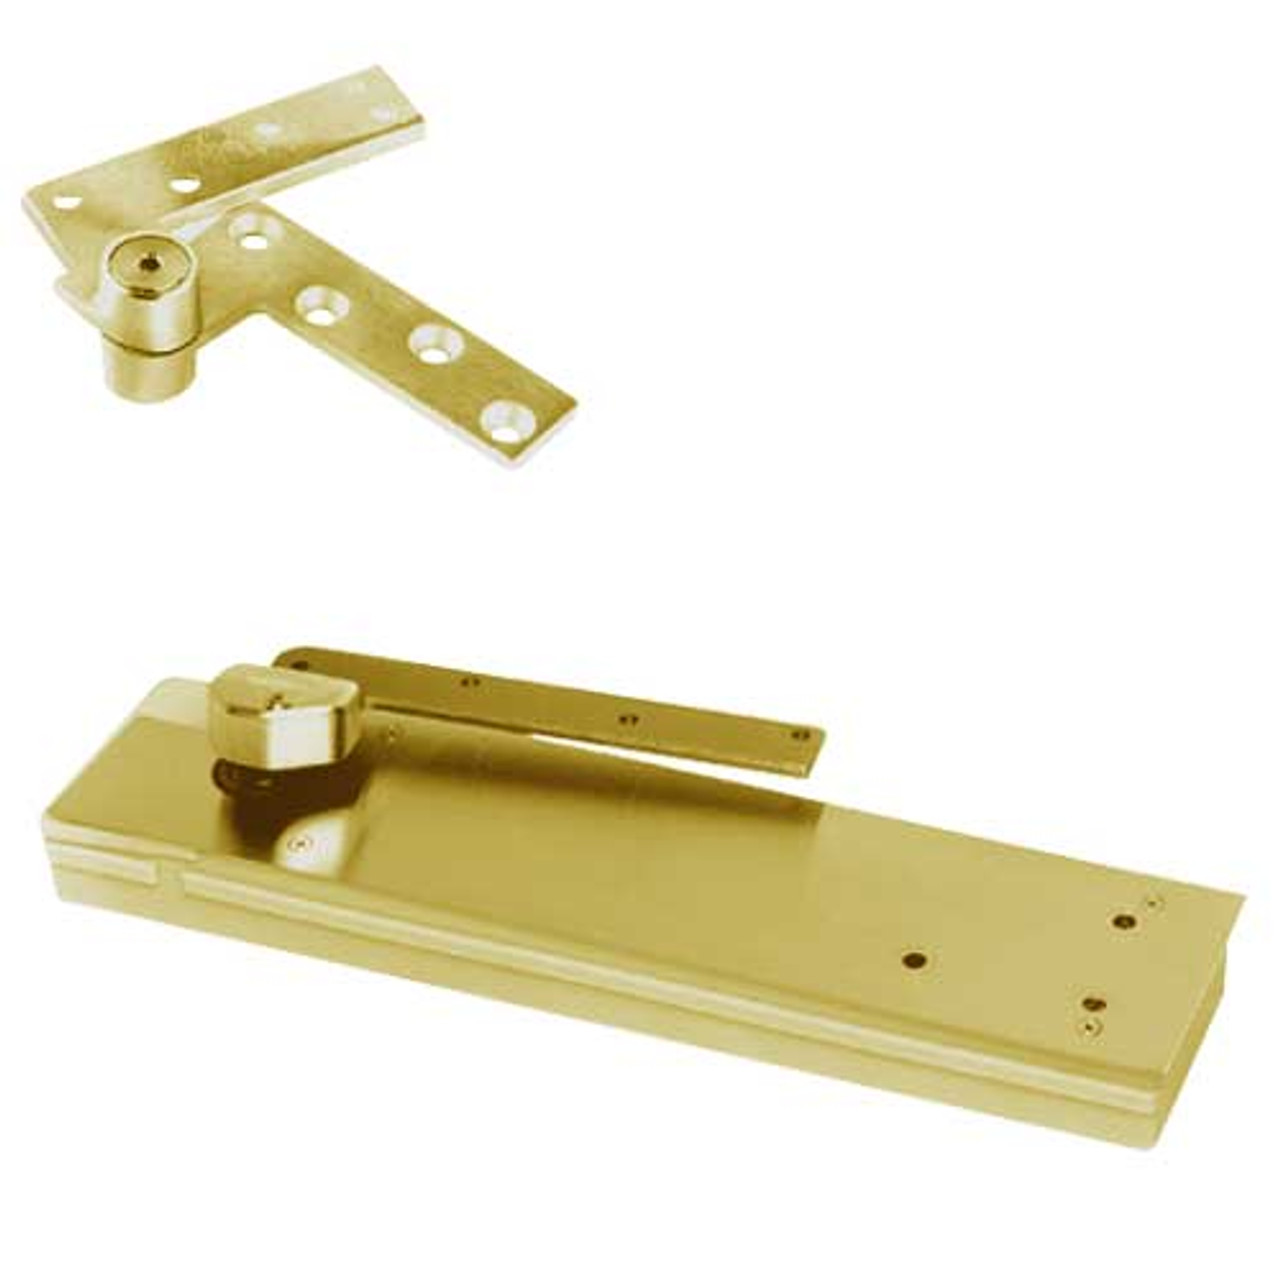 5103ABC180-1-1/2OS-LCC-RH-606 Rixson 51 Series 1-1/2" Offset Hung Shallow Depth Floor Closers in Satin Brass Finish